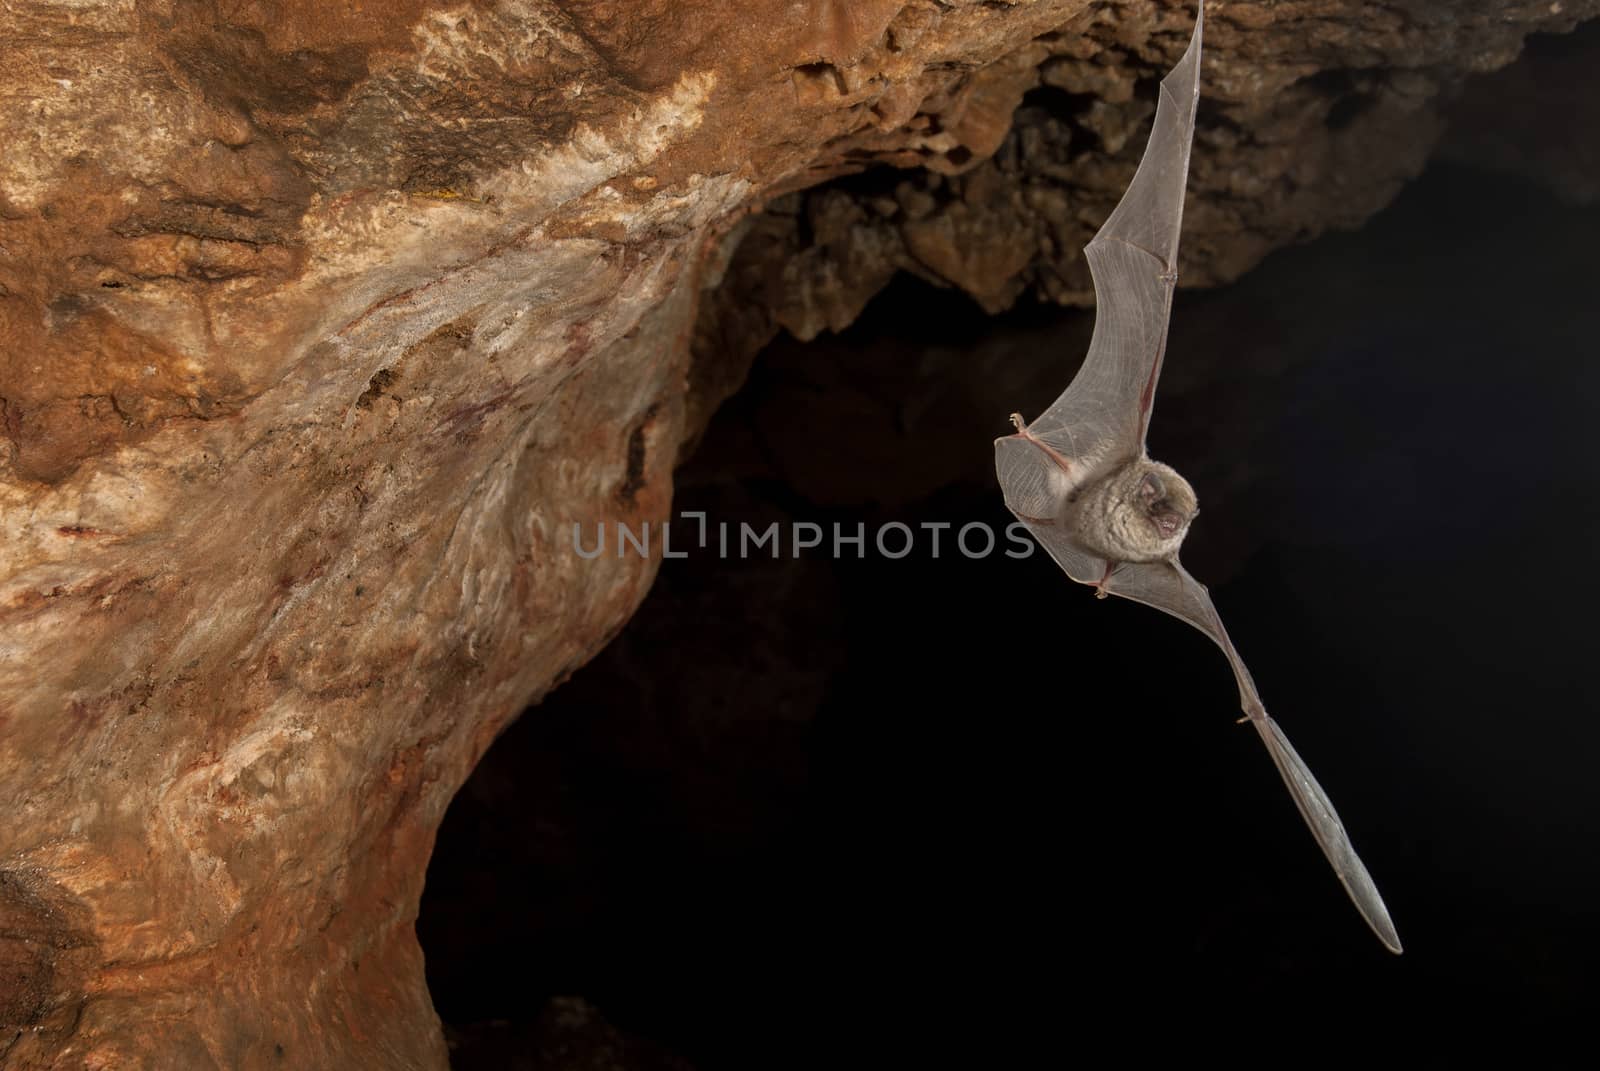 Bat-bent common miniopterus schreibersii, flying in a cave  by jalonsohu@gmail.com